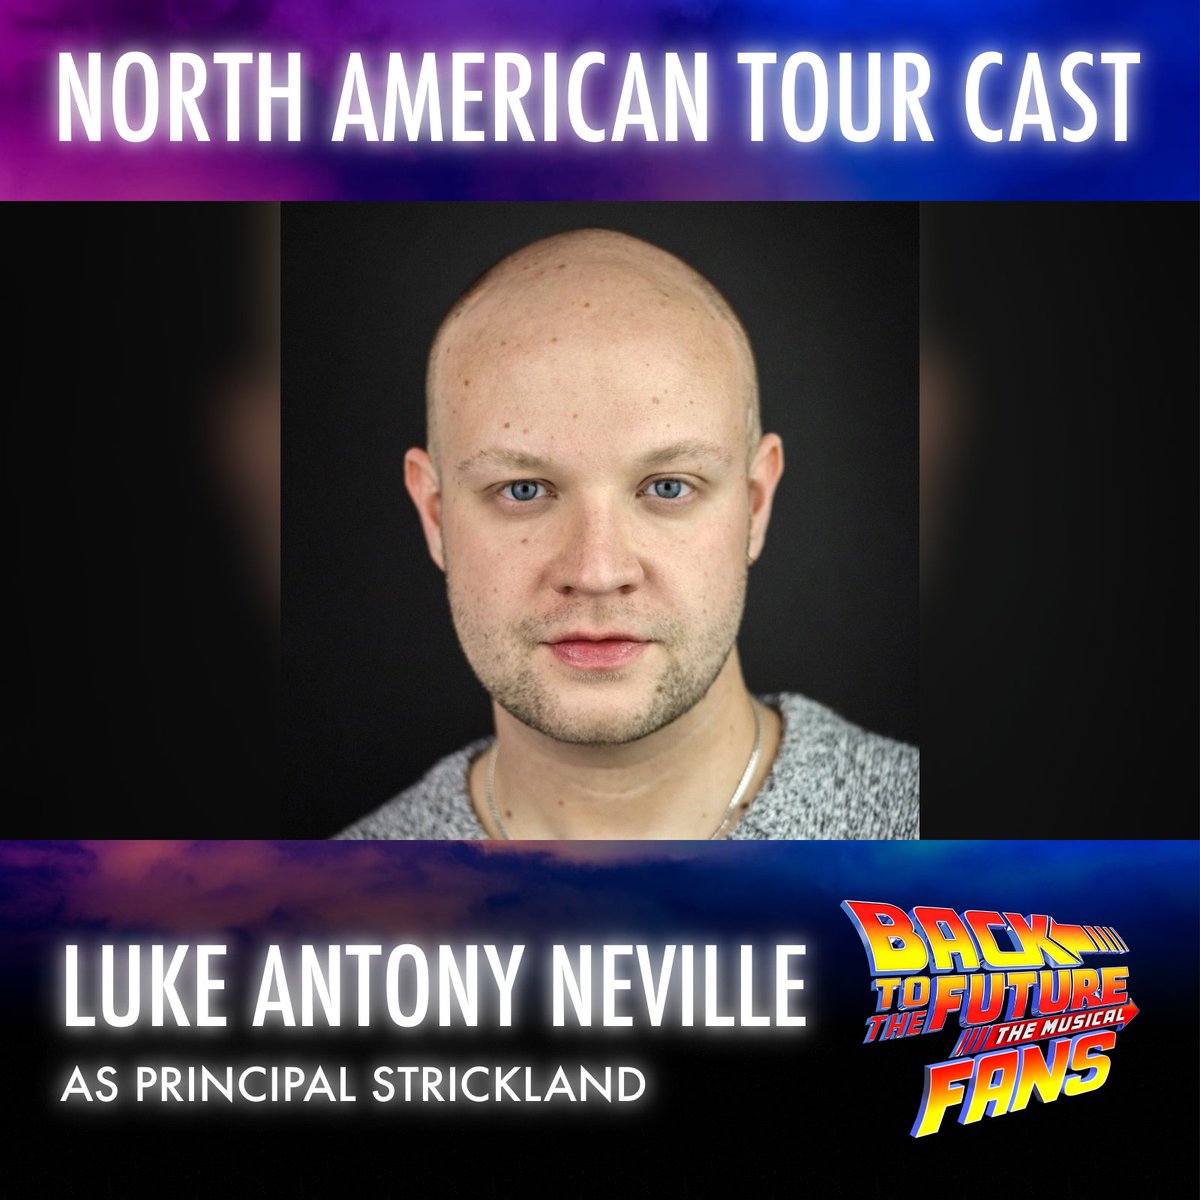 The Chamber of Commerce welcomes Luke to Hill Valley! 💐 Introducing Luke Antony Neville as #Strickland and #DocBrown cover for the @BTTFBway North American Tour Cast 📢 🎟 Dates, venues and tickets at backtothefuturemusical.com/northamerica #bttfbway #bttfbroadway #broadway #bttftour